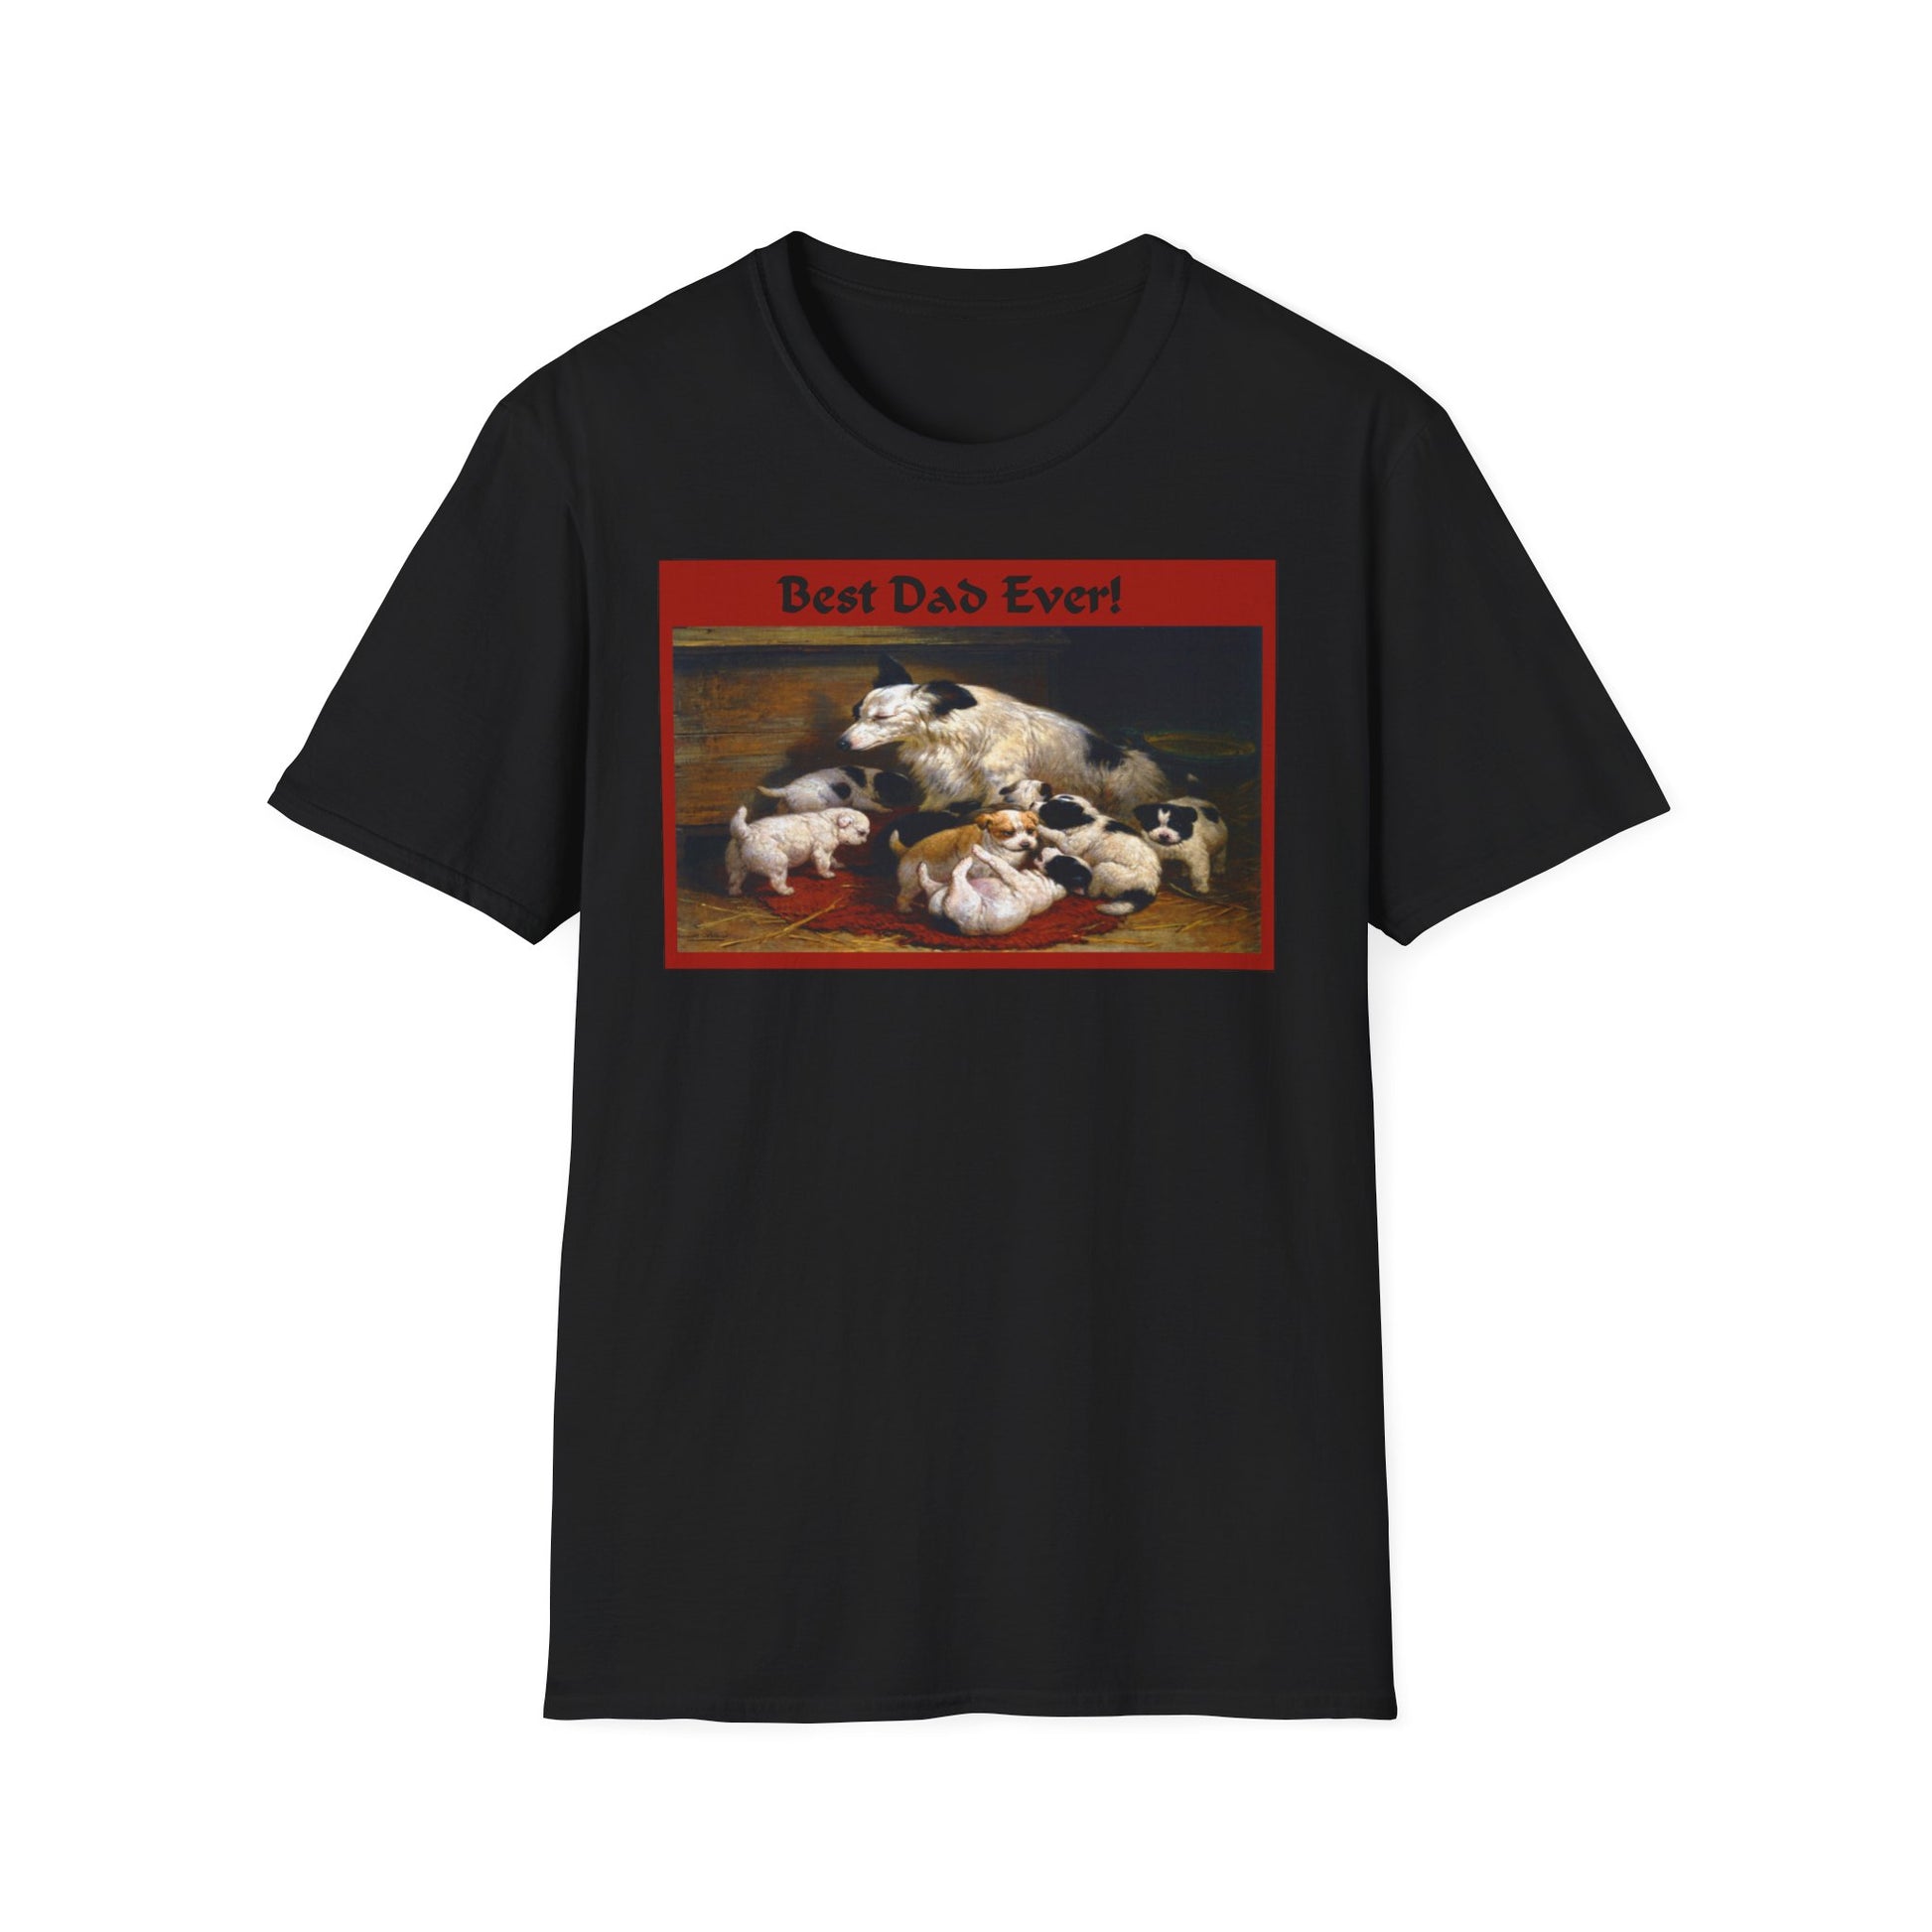 A black t-shirt with a design of a sheep dog with puppies. At the top of the design it says Best Dad Ever!